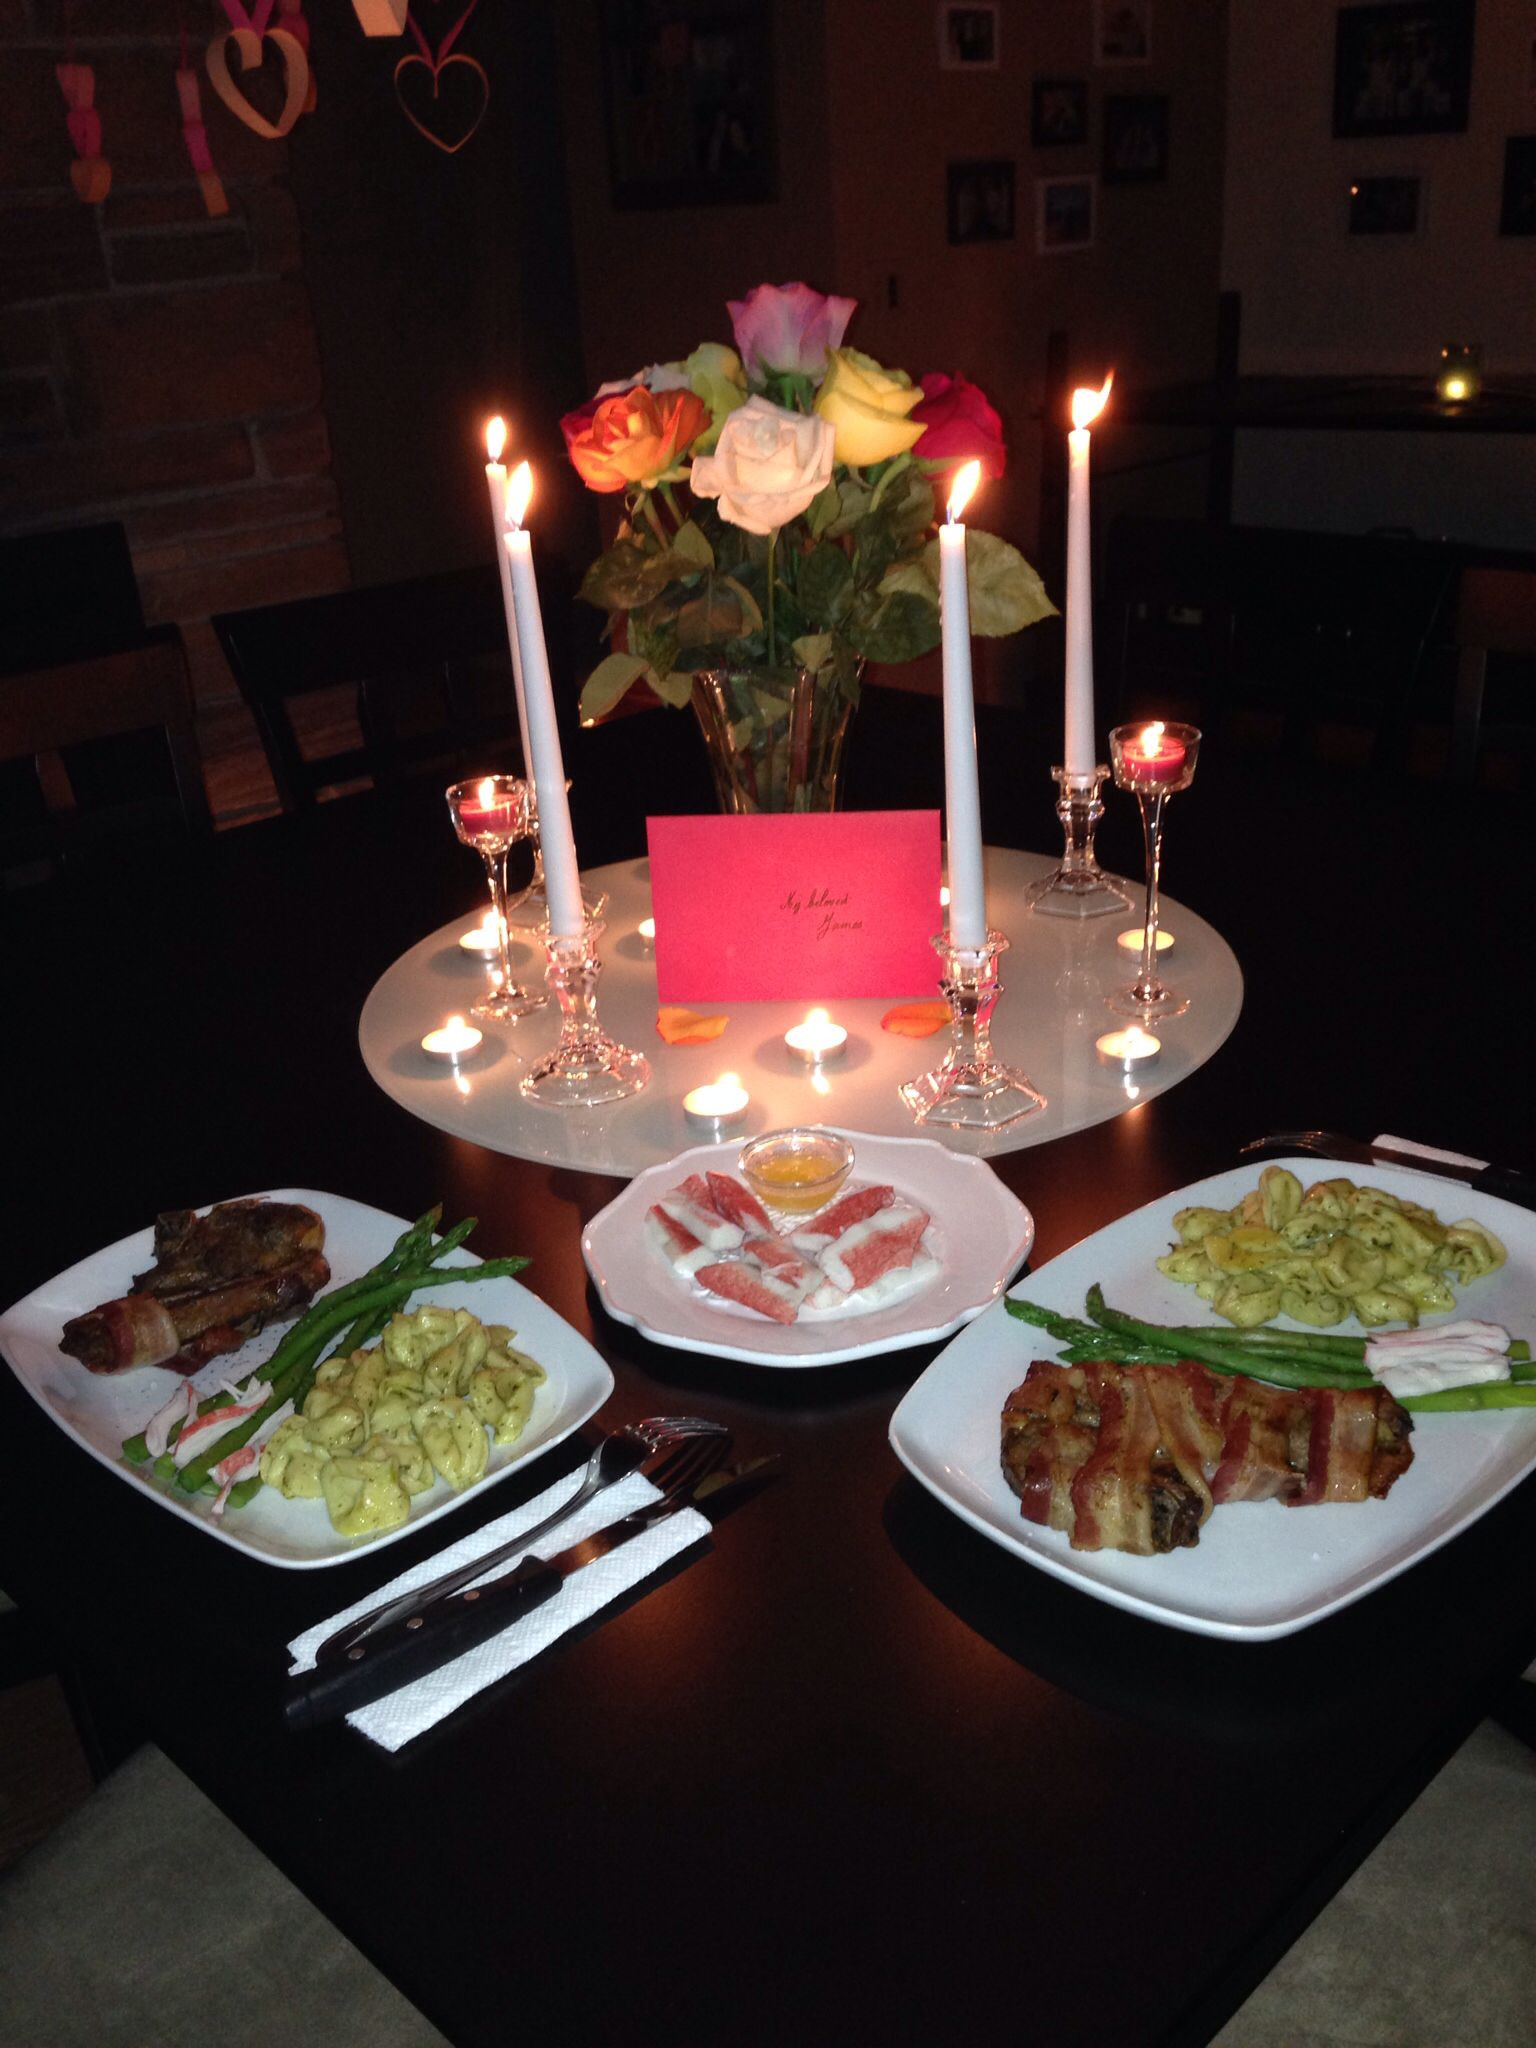 Birthday Dinner Ideas For Him
 Pin by Vanessa Vu on Candlelight dinner